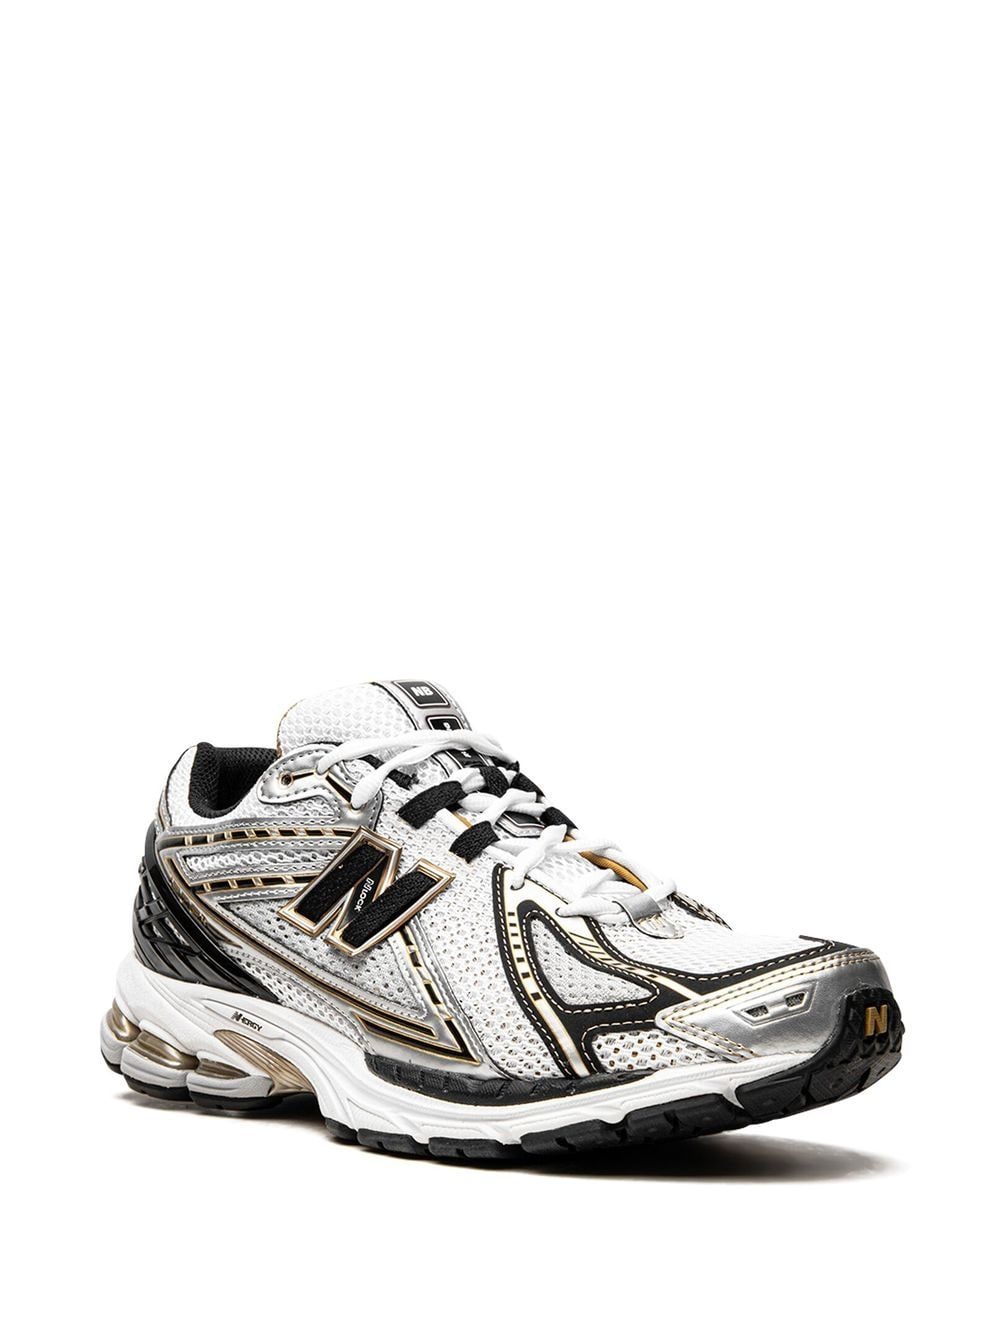 1906R "White/Gold" sneakers<BR/><BR/><BR/>